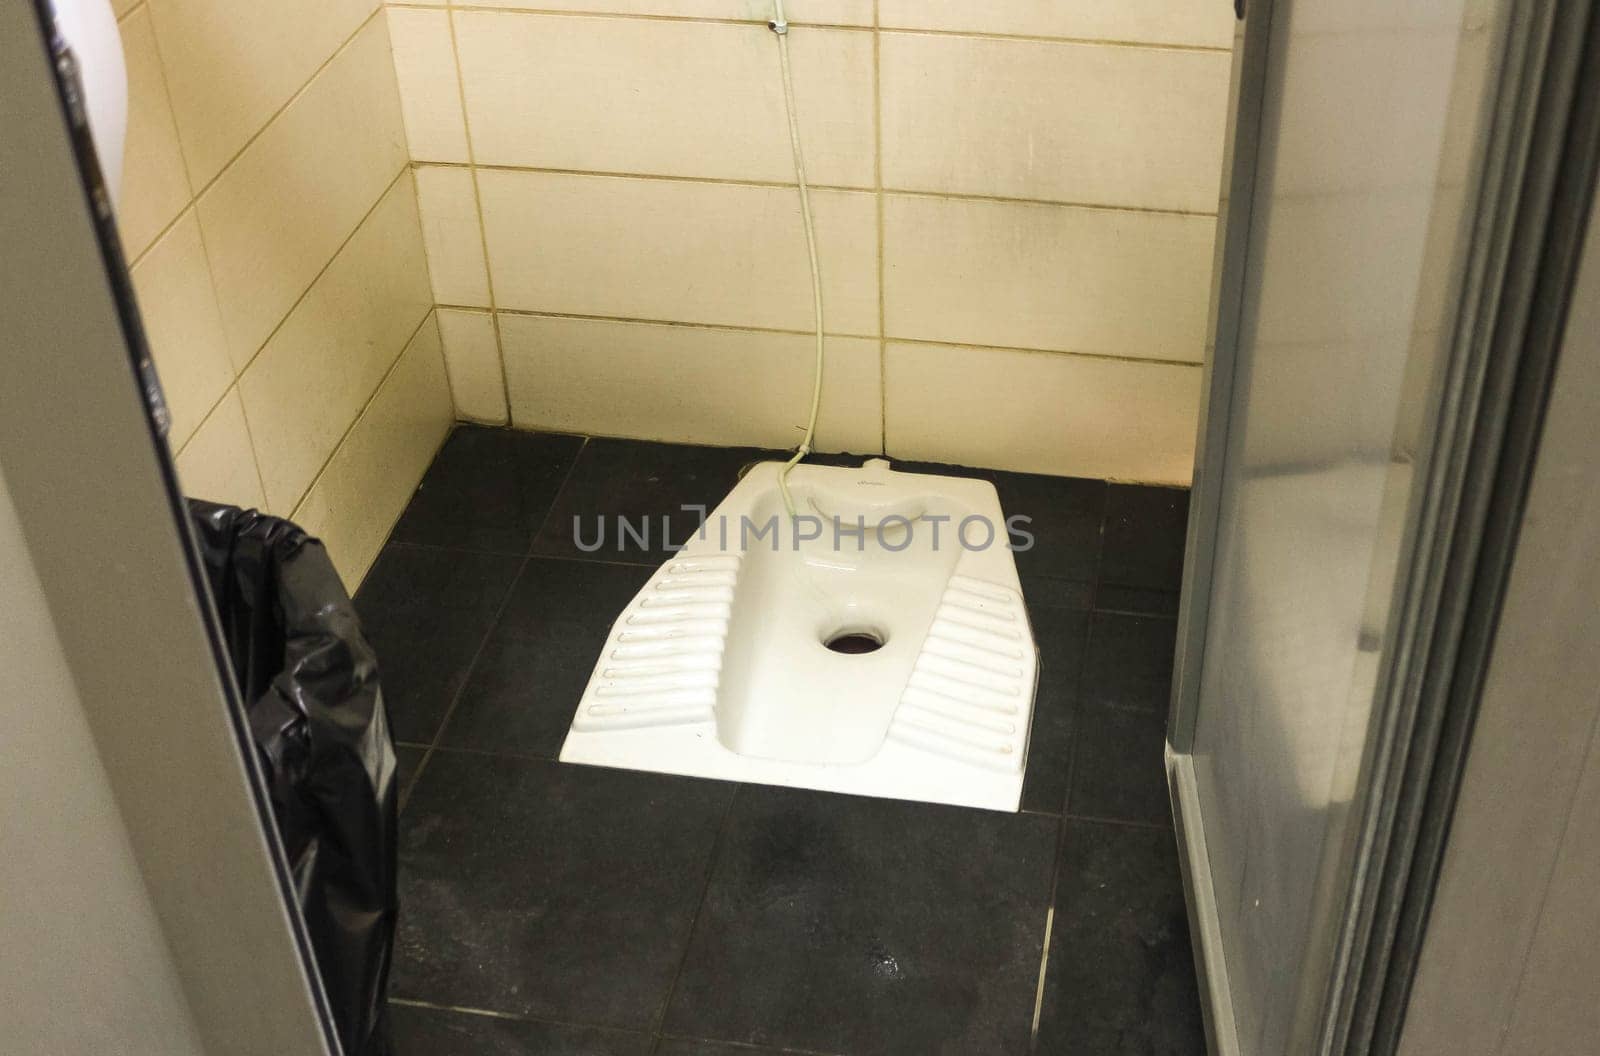 Embracing Tradition: The Simplicity of a Squat Toilet by DakotaBOldeman